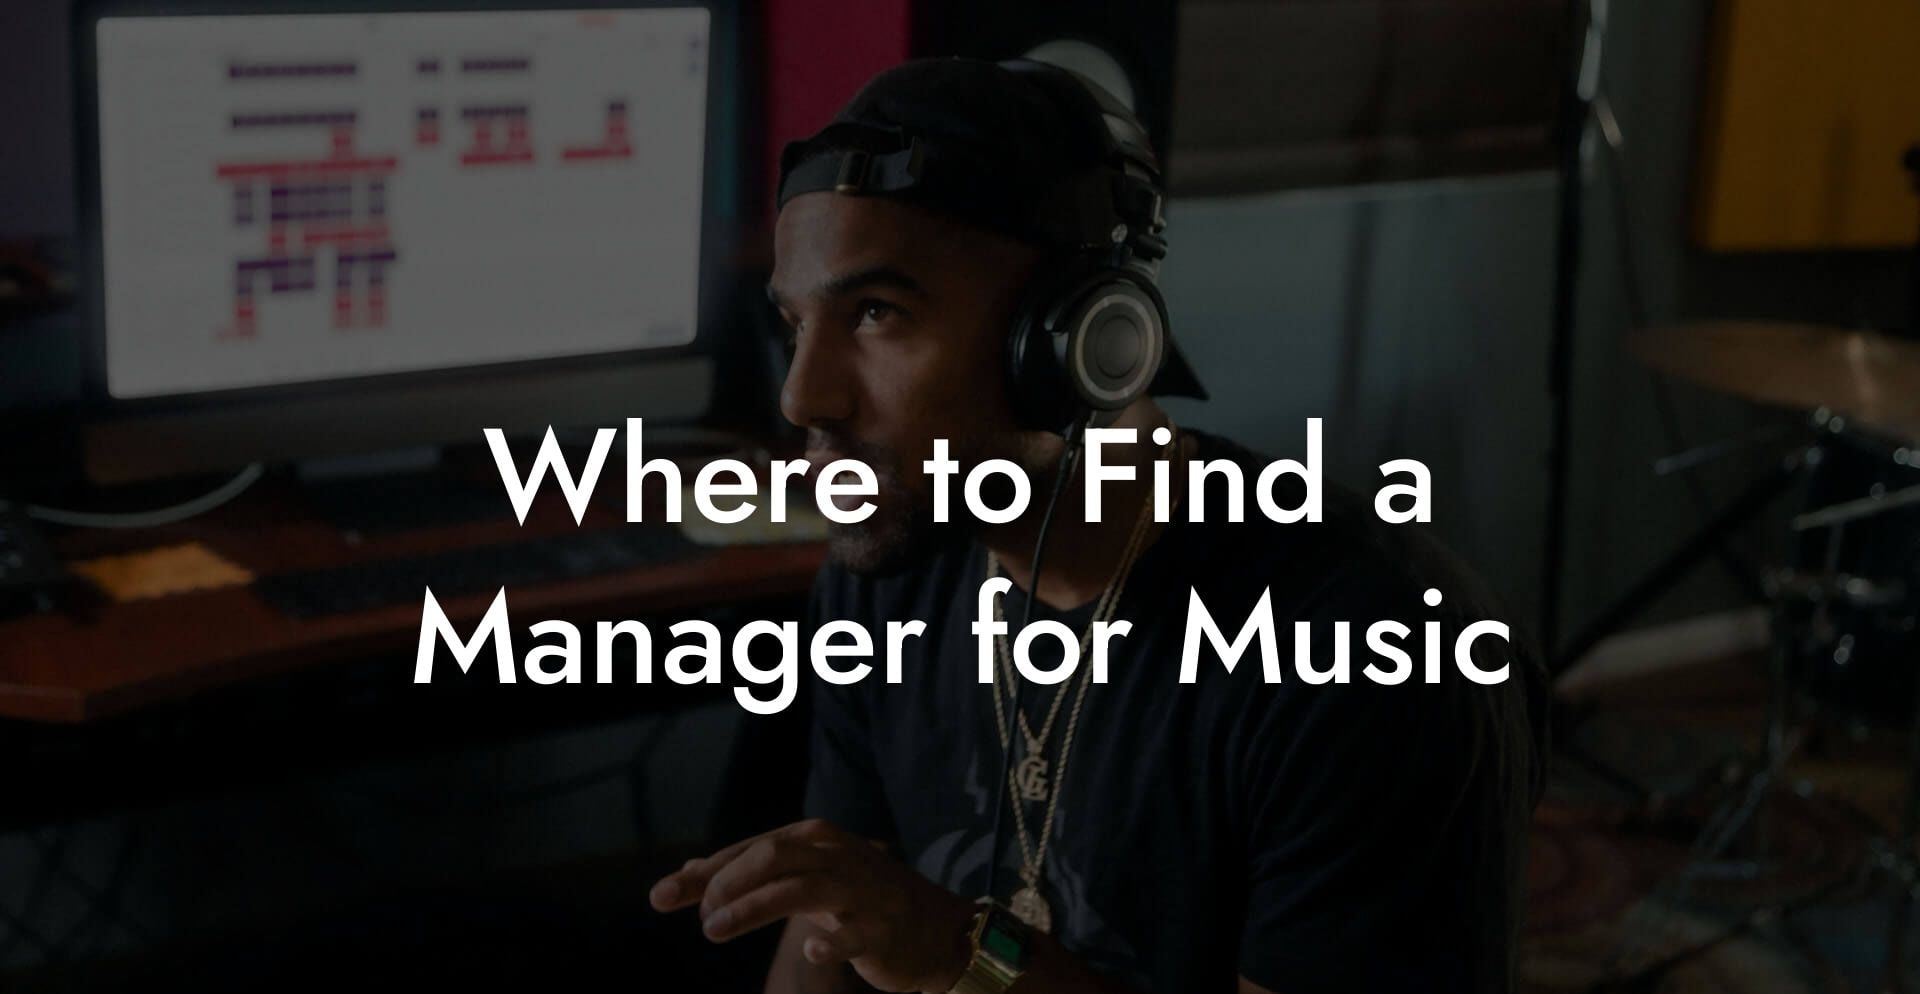 Where to Find a Manager for Music